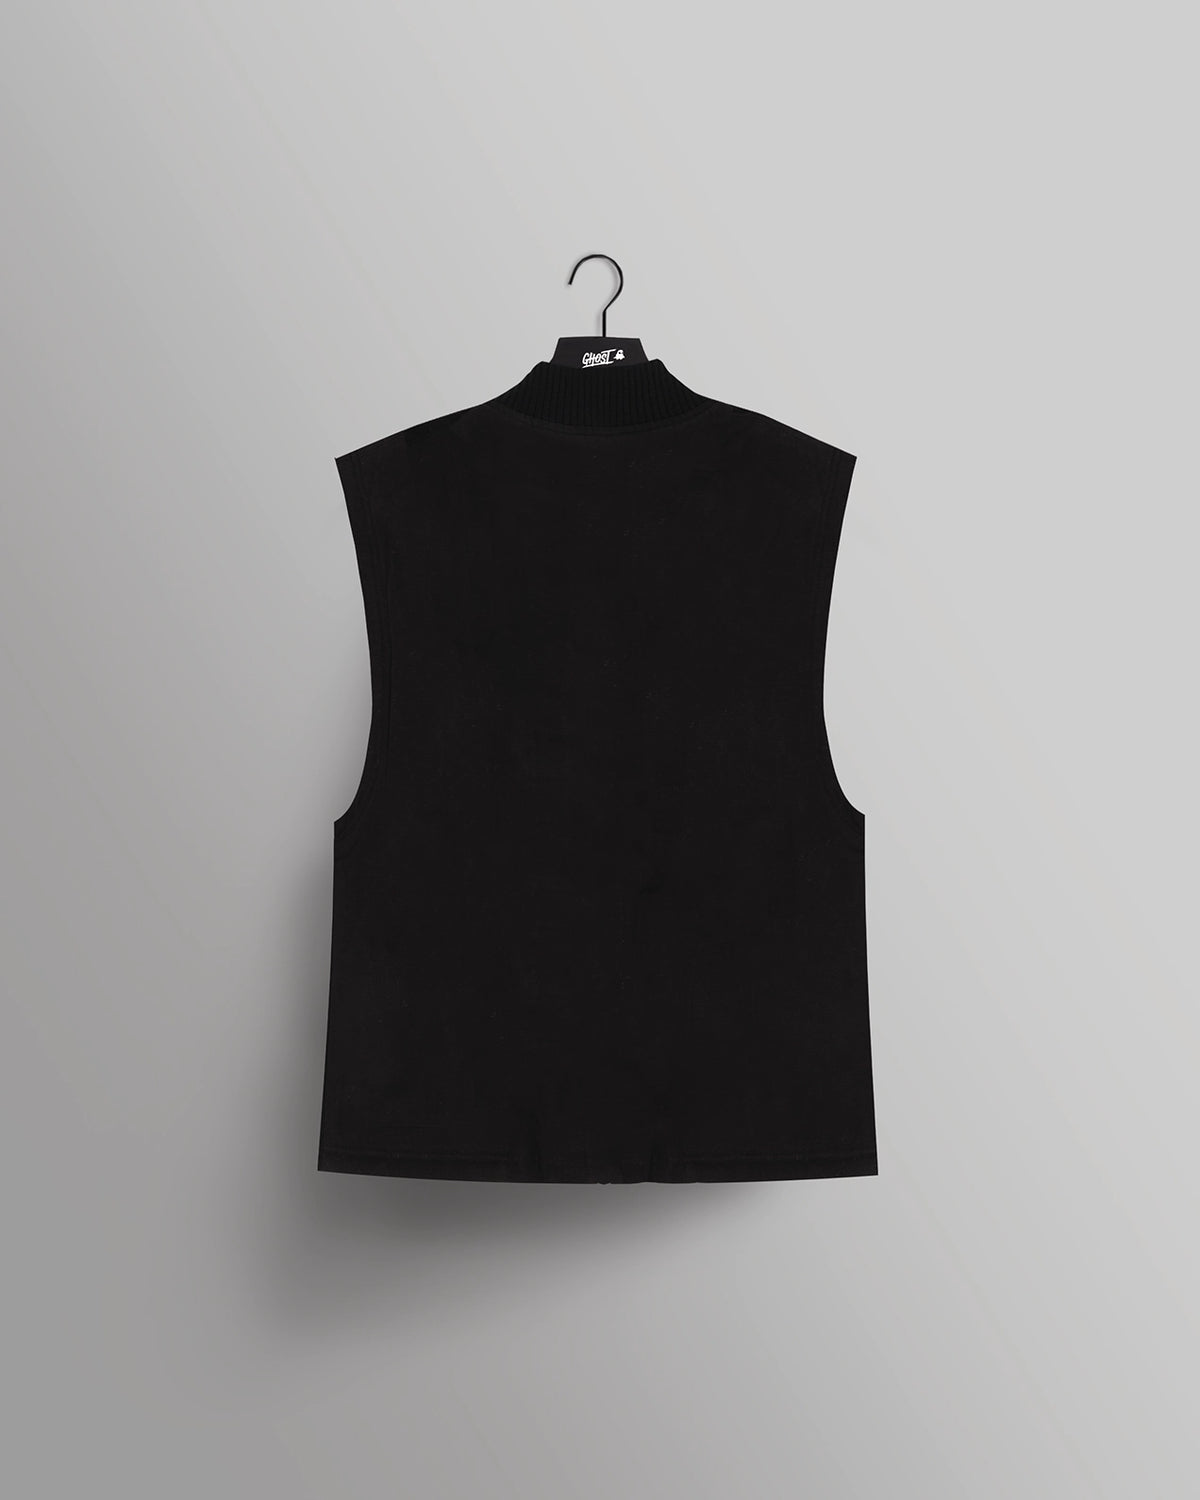 GHOST® SHERPA LINED VEST BLACK | - GHOST LIFESTYLE